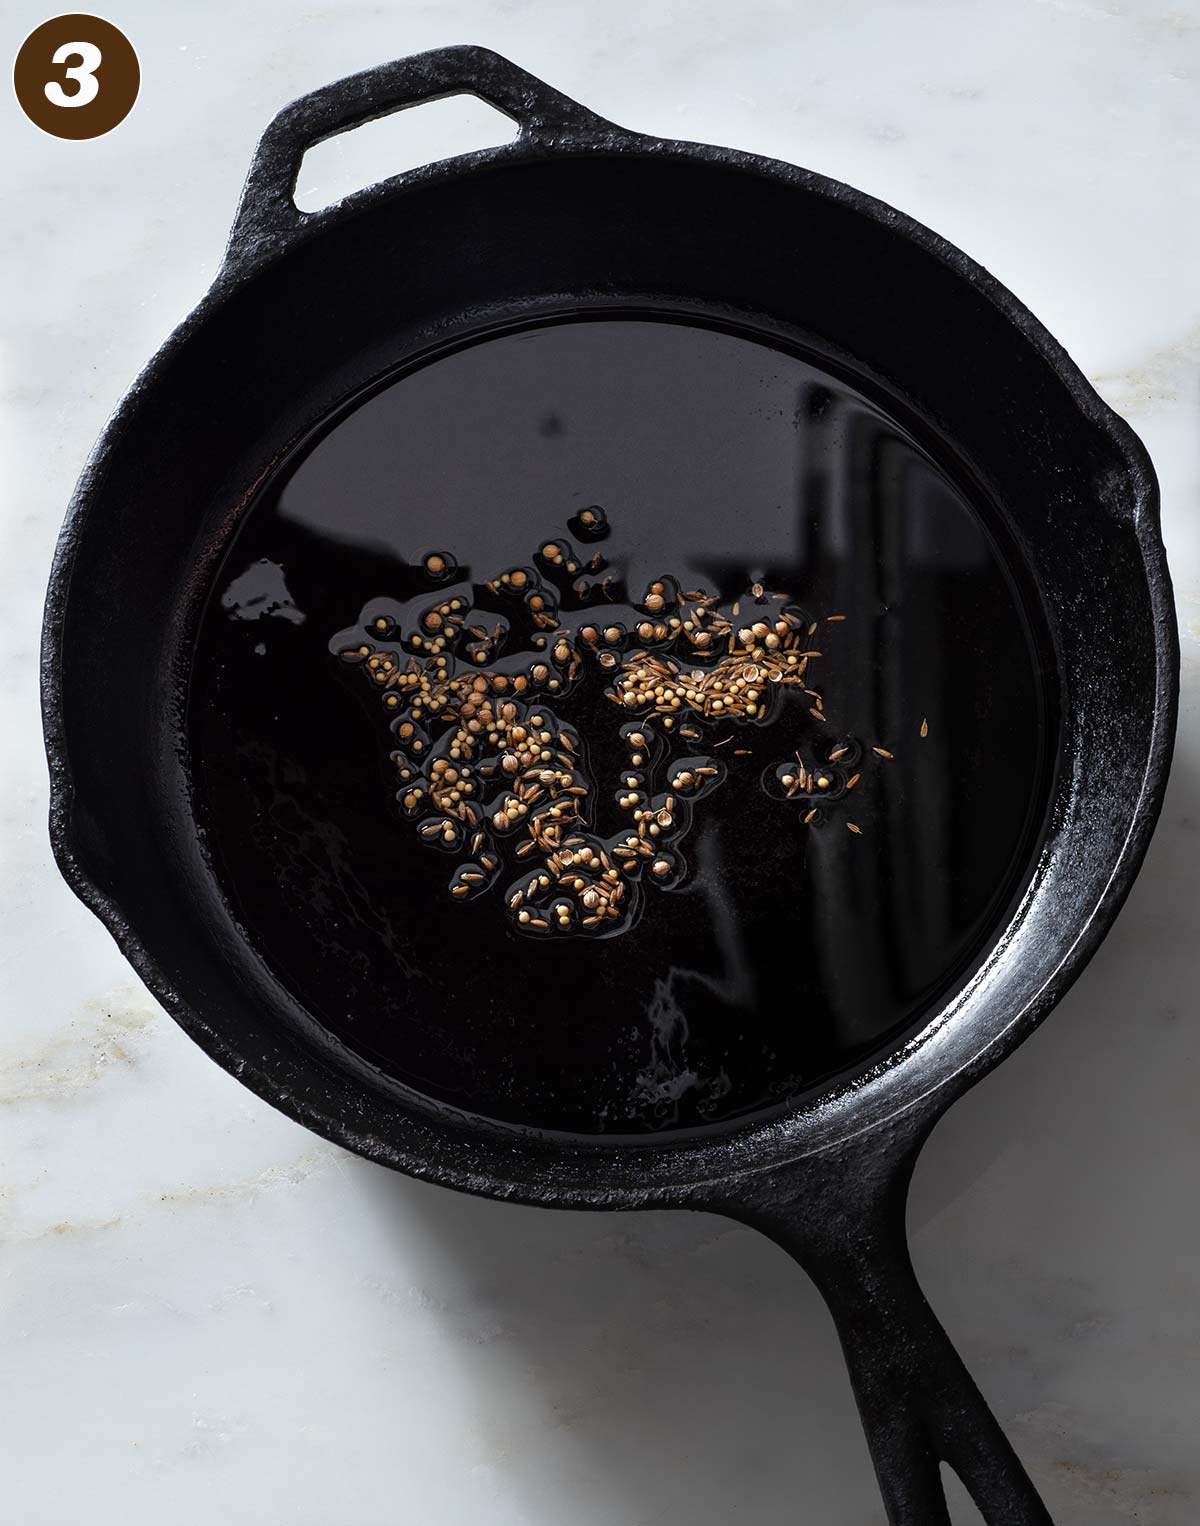 Spice seeds and oil in a cast iron pan.